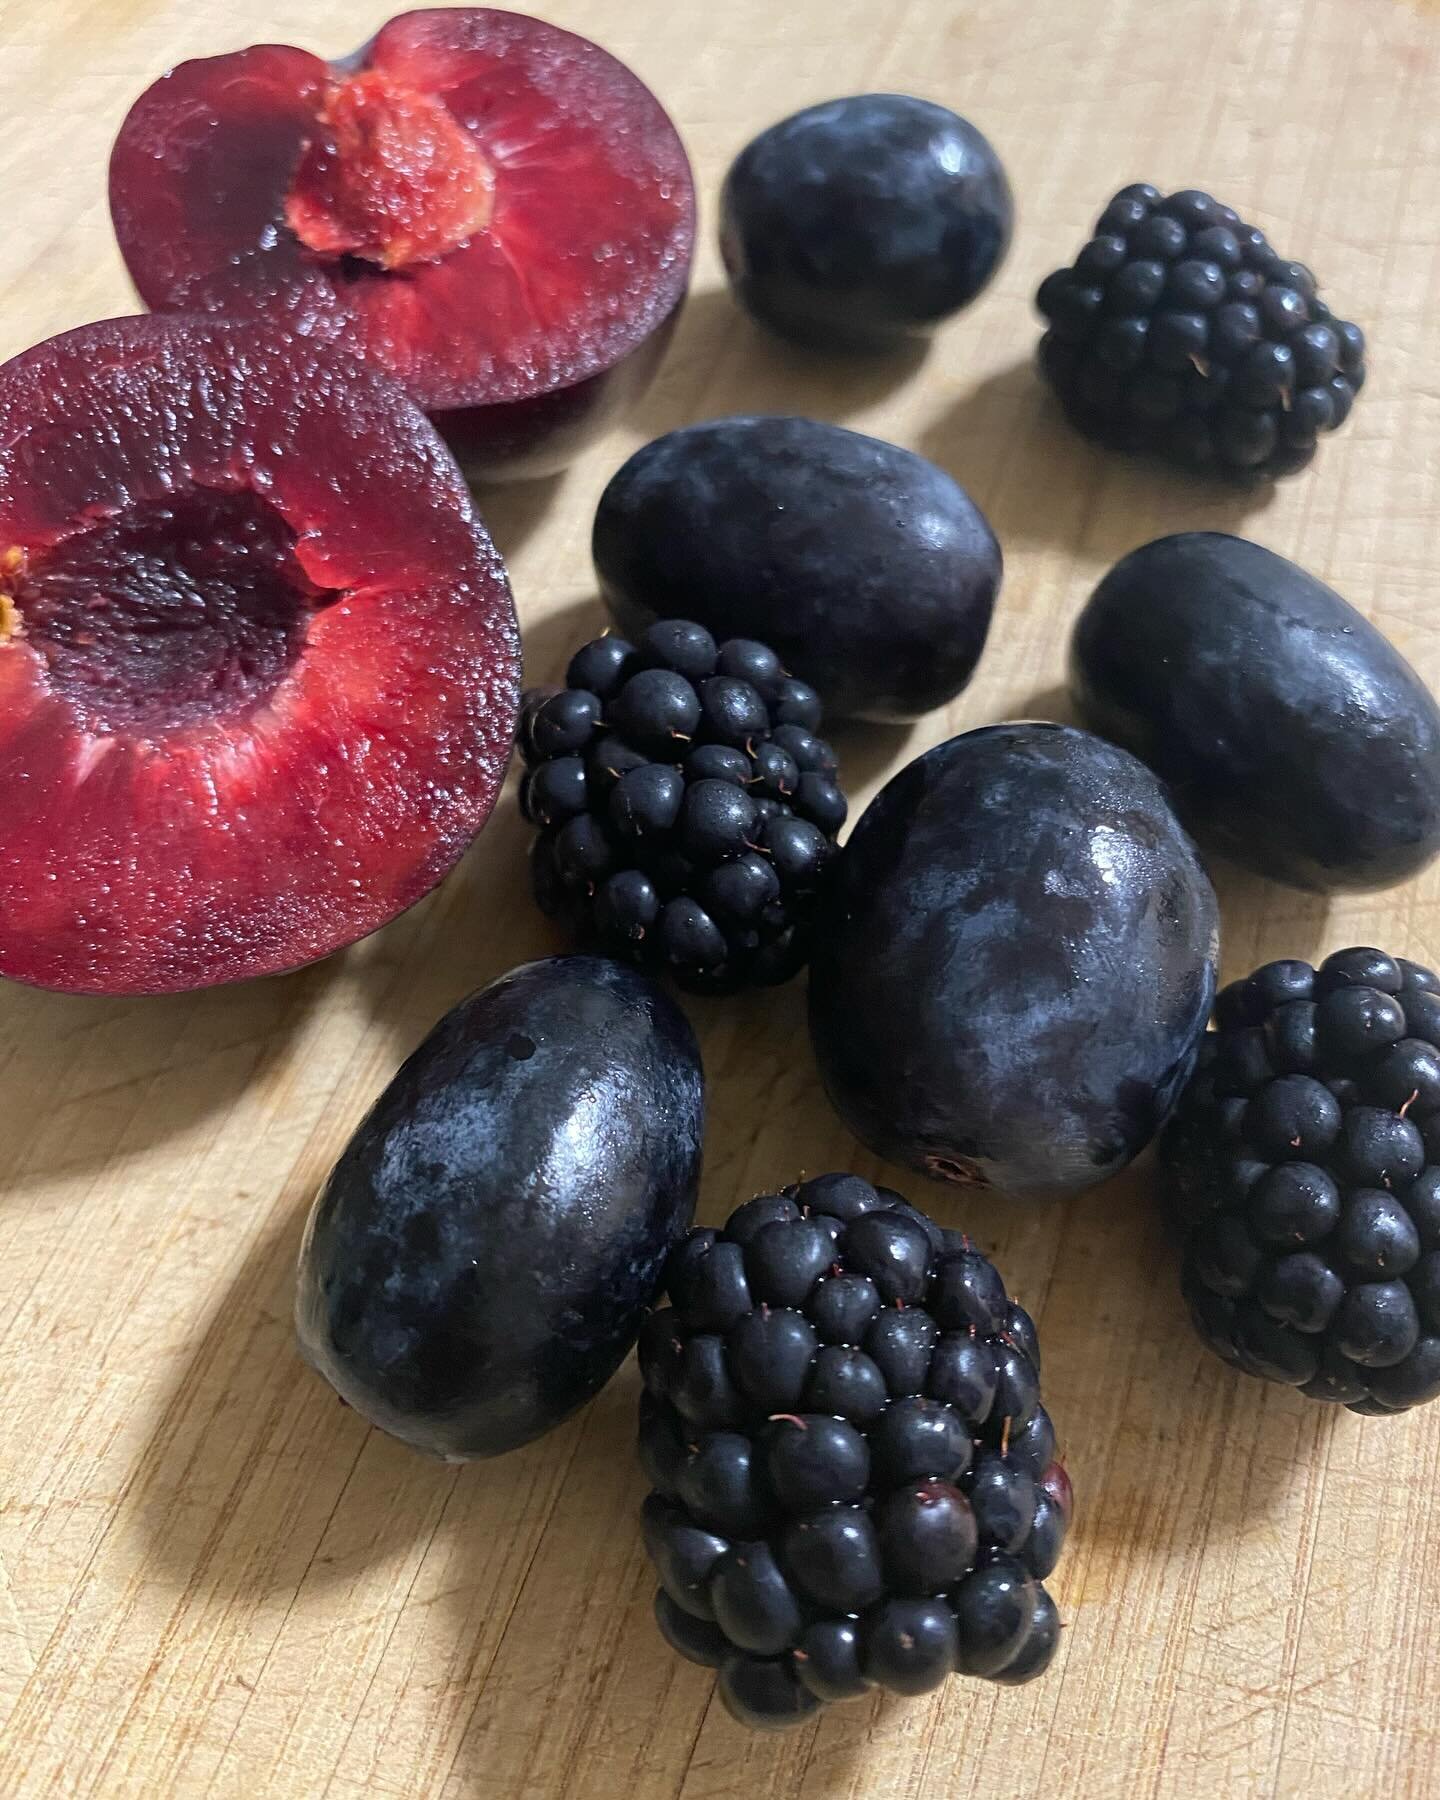 Blue and purple foods aren&rsquo;t just visually appealing they&rsquo;re also packed with anthocyanins, powerful antioxidants that fight inflammation and protect cells from damage. 
But that&rsquo;s not all! 
These superfoods also support a healthy g